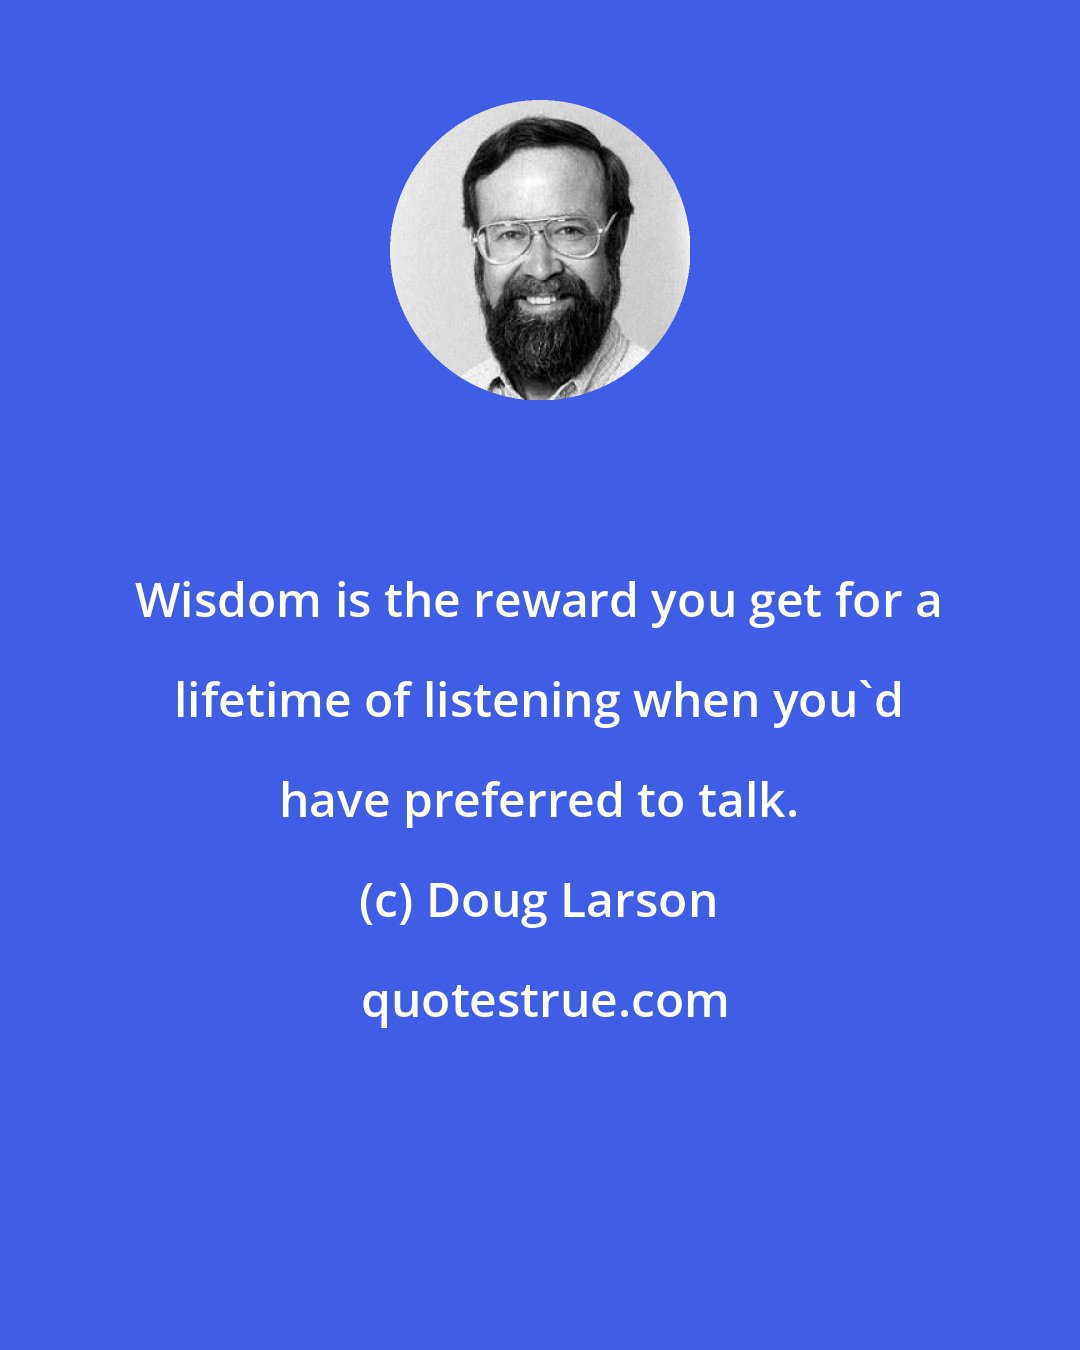 Doug Larson: Wisdom is the reward you get for a lifetime of listening when you'd have preferred to talk.